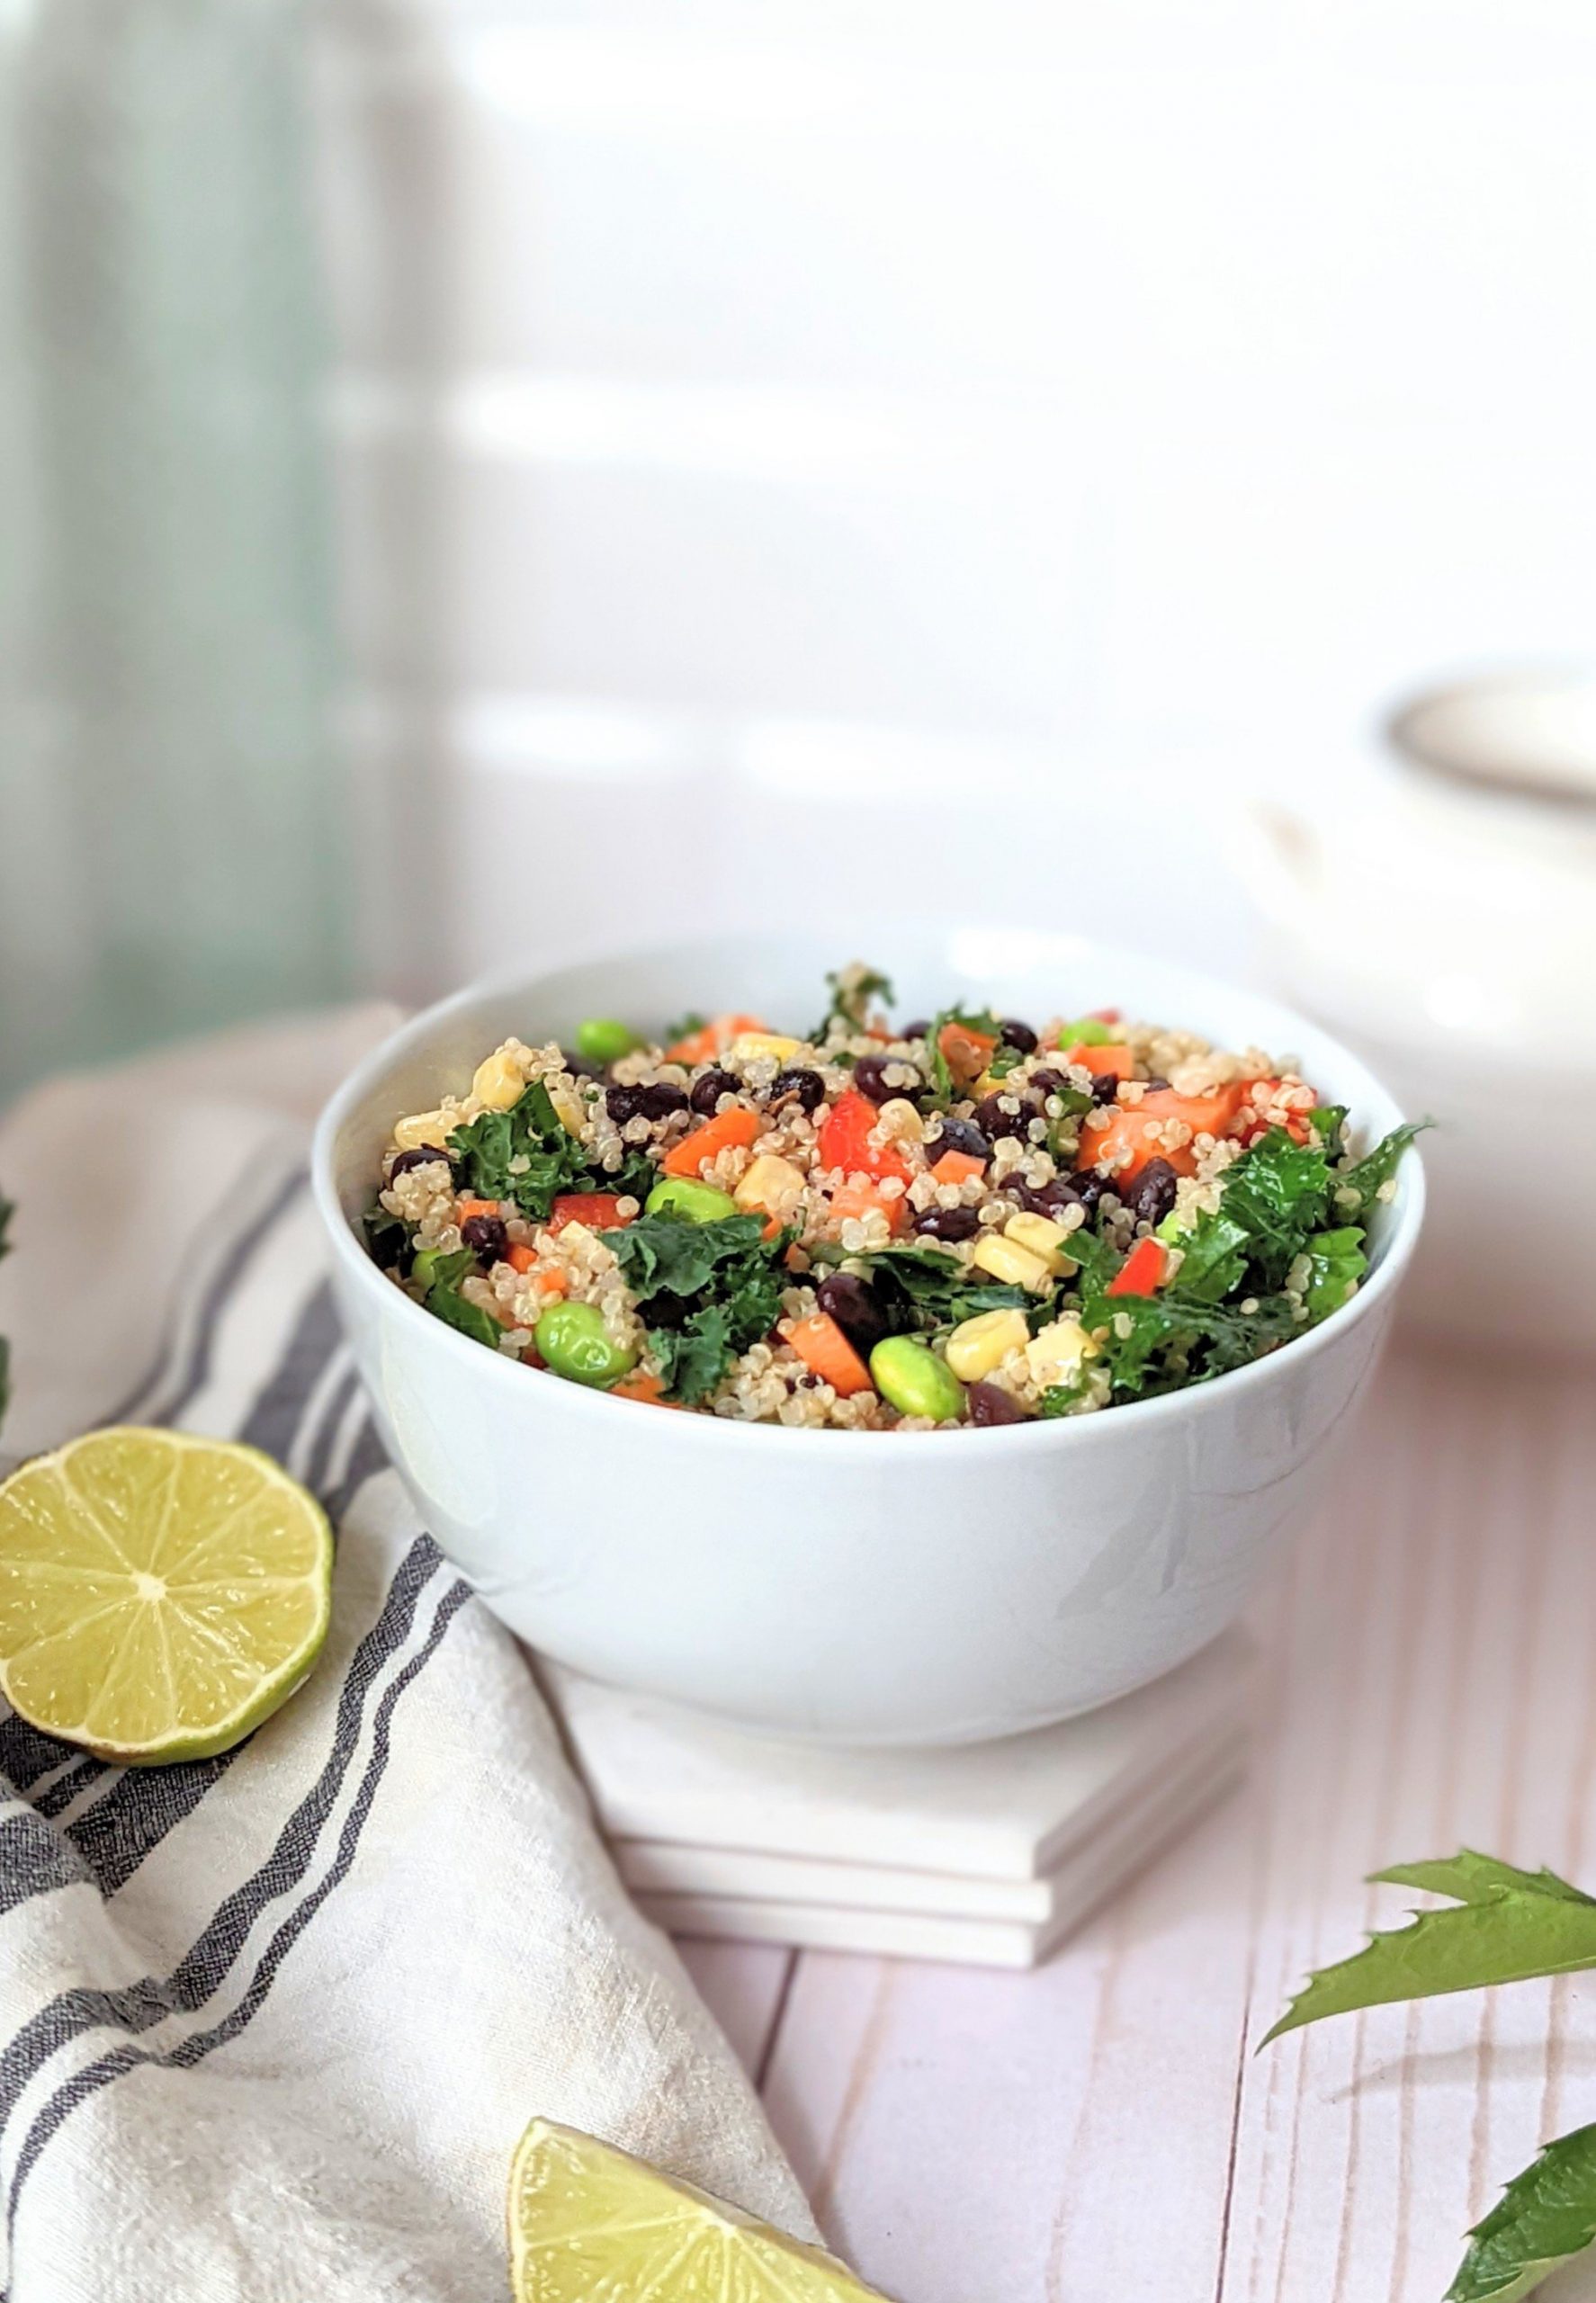 high fiber quinoa salad recipe with beans avocado corn and red chili pepper flakes in a bowl with fresh lime juice dressing